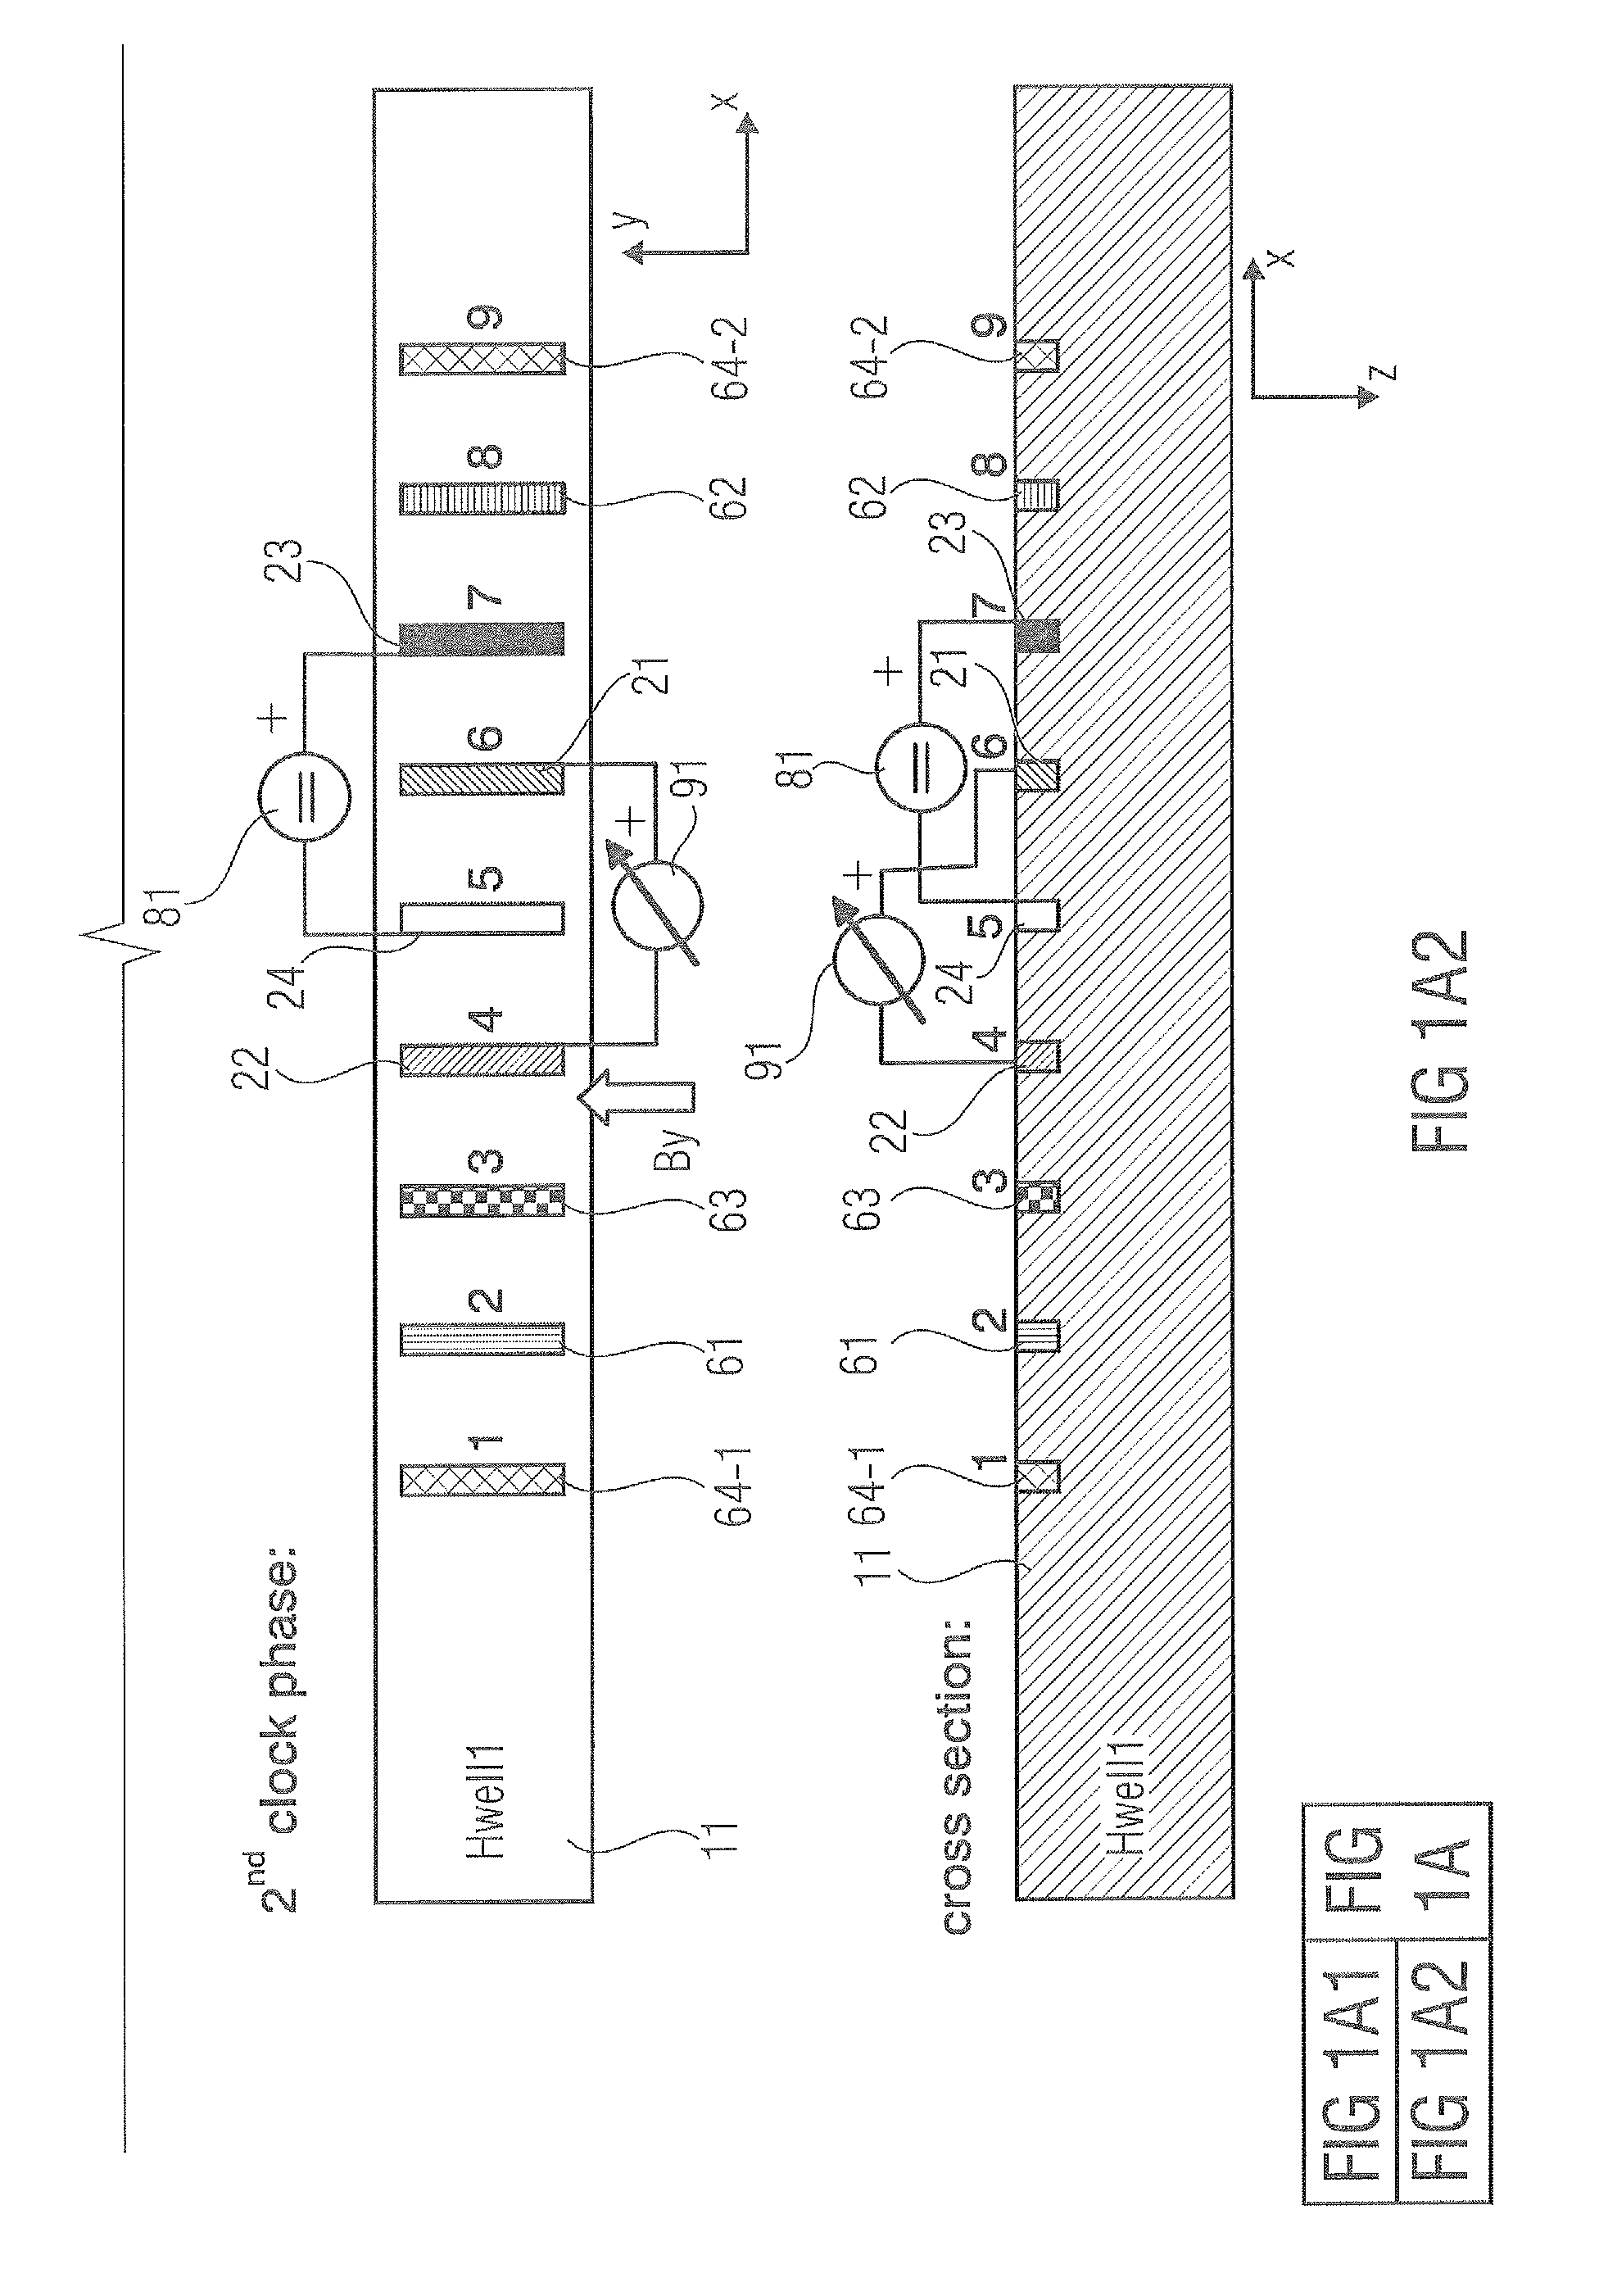 Vertical hall sensor with high electrical symmetry